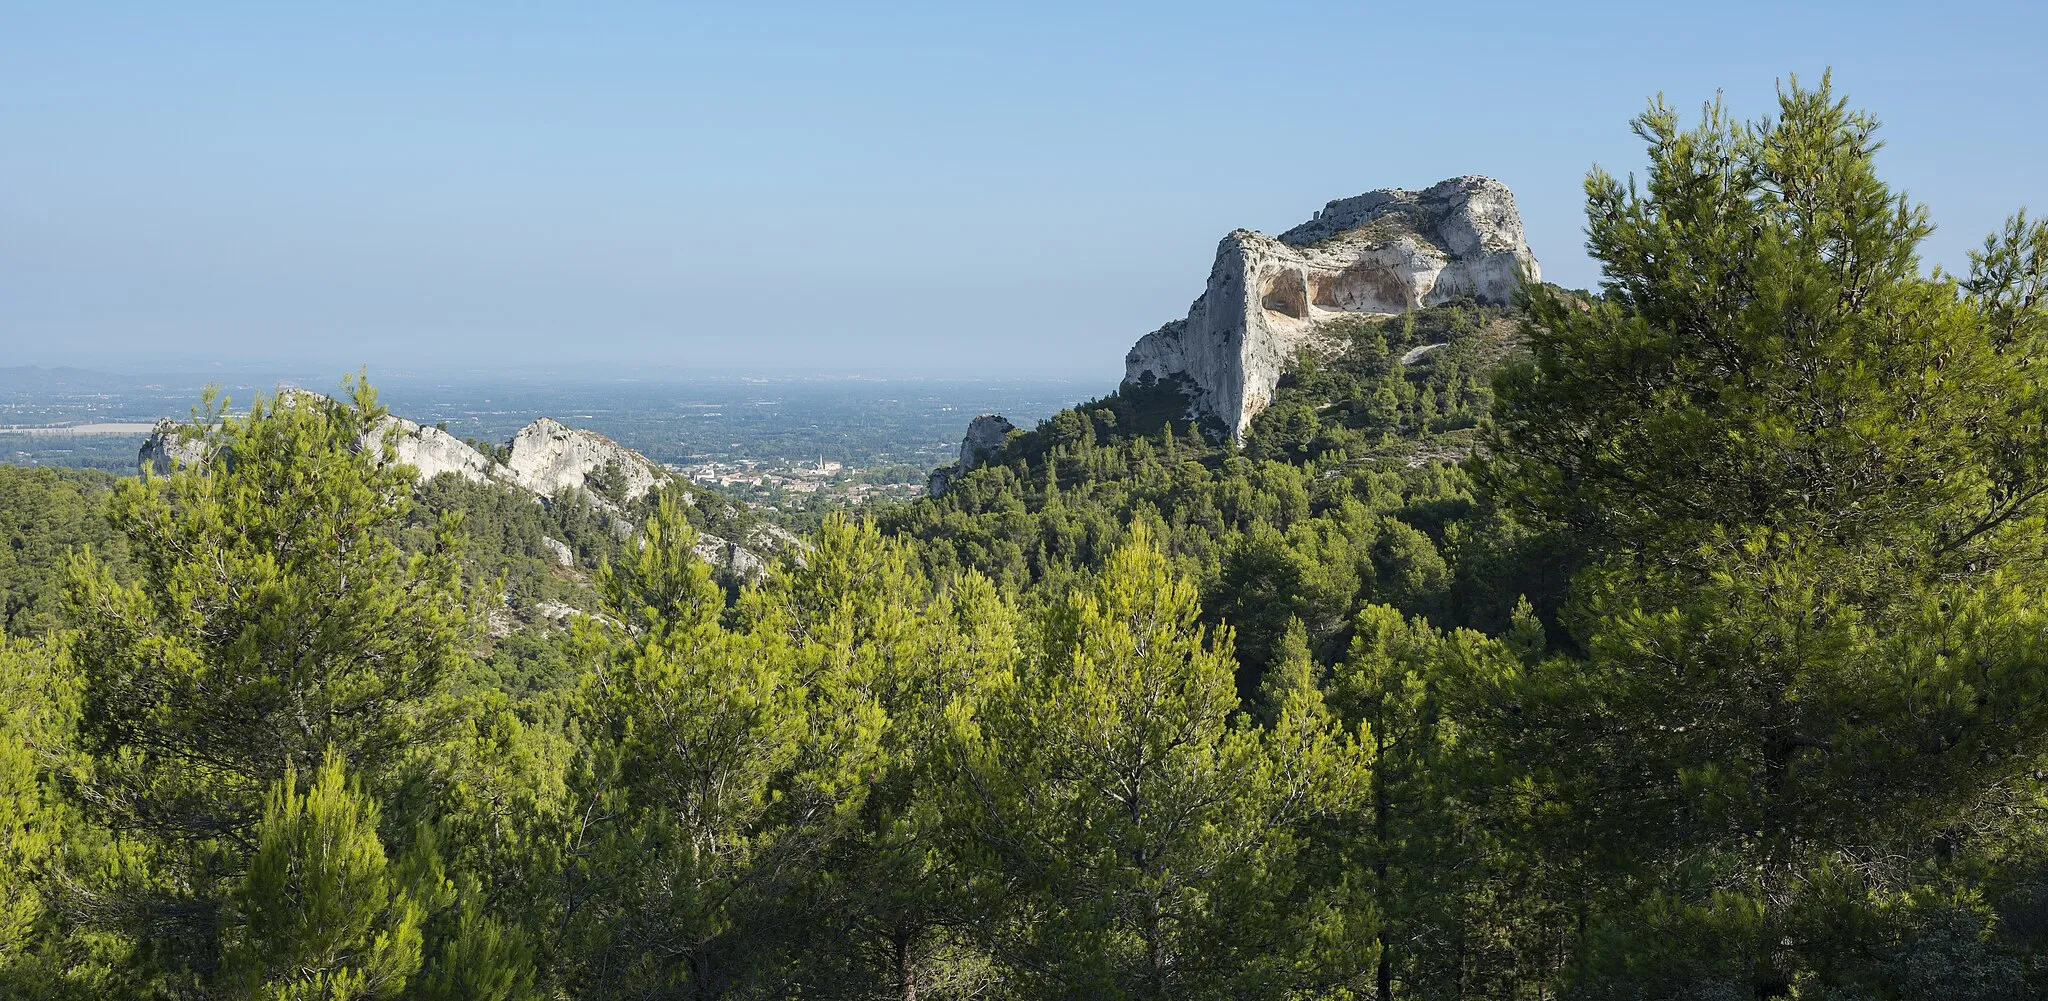 Photo showing: Landscape in the Alpilles regional park. Taken in the commune Saint-Rémy-de-Provence Which can be seen in the background, Bouches-du-Rhône, France